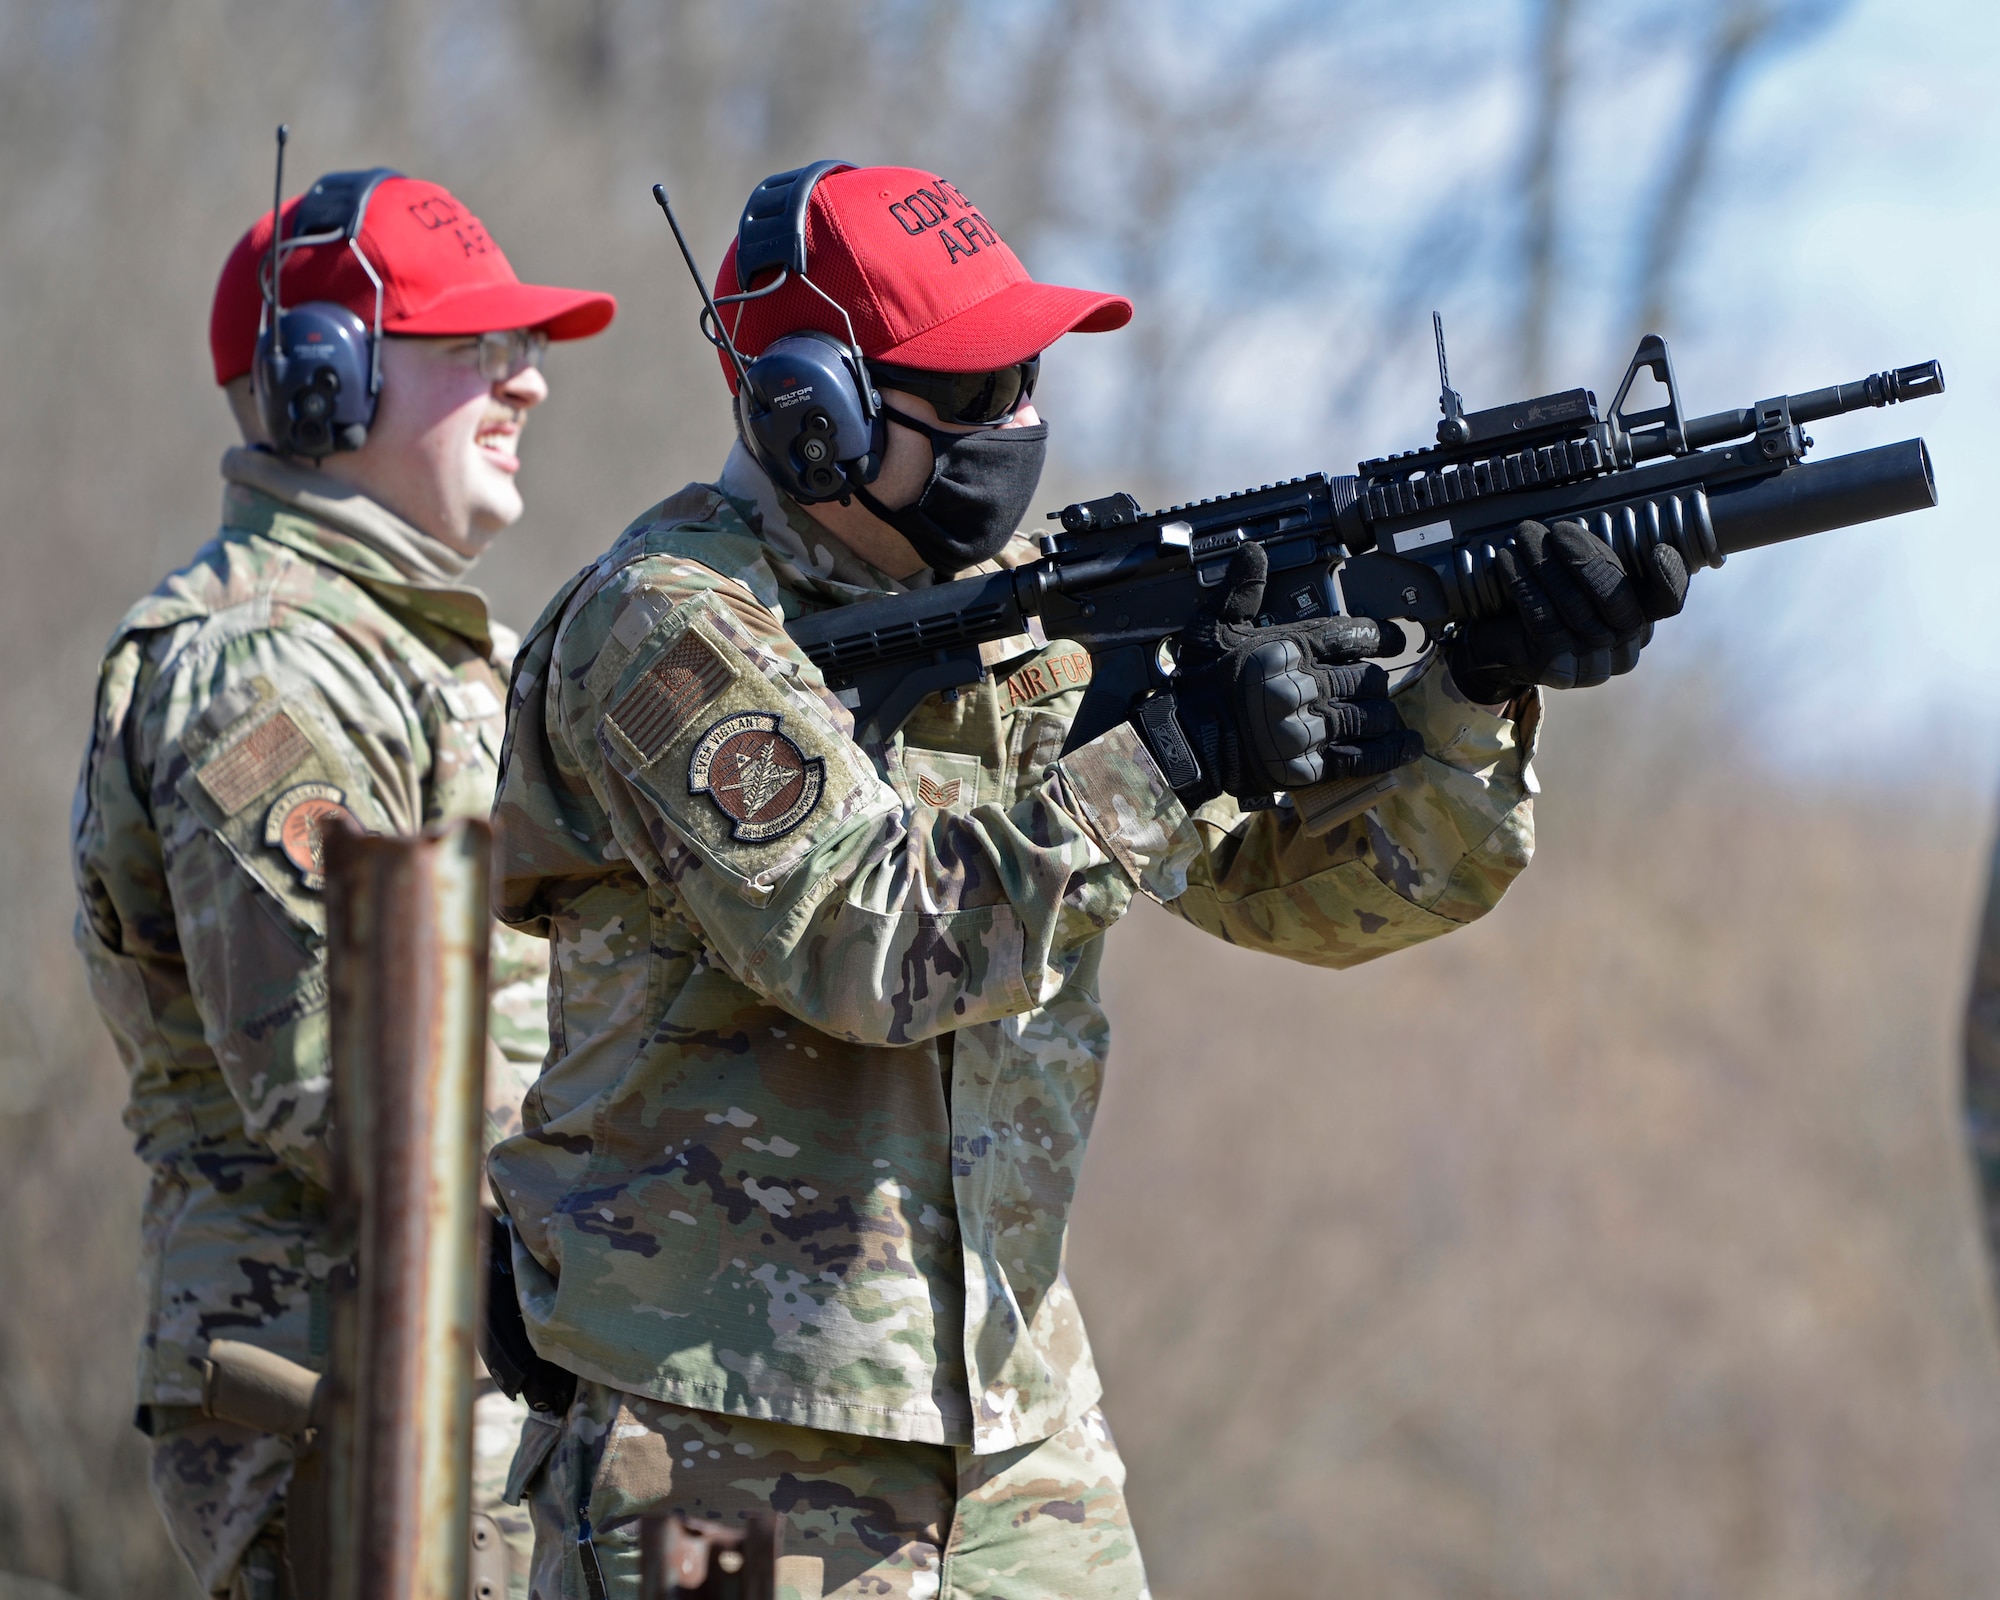 Air Force Technical Sgt. Richard Thomas, the 88th Security Forces Squadron noncommissioned officer in charge of Combat Arms, right, fires an M203 grenade launcher at Camp Atterbury in Edinburgh, Indiana, on Feb. 25, 2021. The combat arms instructors, from Wright-Patterson Air Force Base, Ohio, travel to Camp Atterbury multiple times each year for readiness and qualification training with deployers on machine guns and grenade launchers. (U.S. Air Force photo by Ty Greenlees)